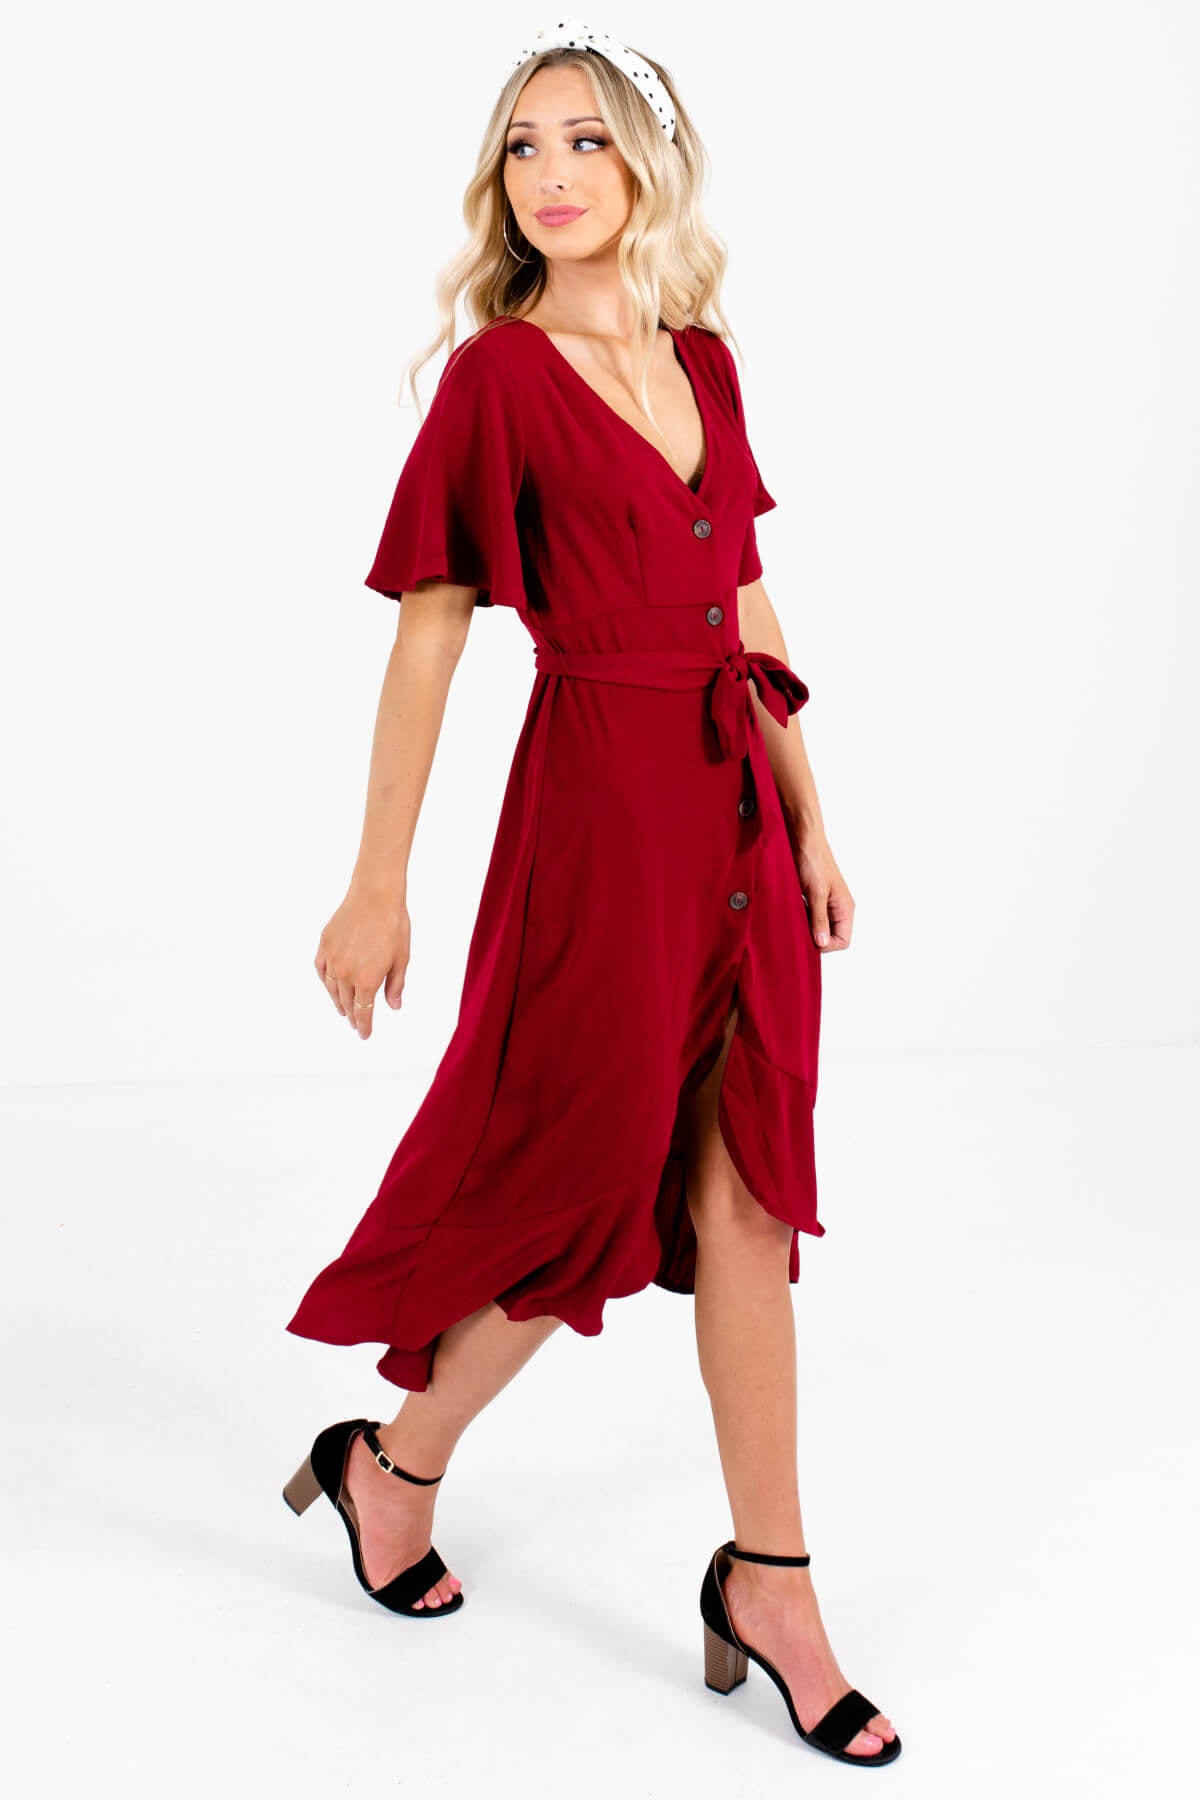 red dress boutique afterpay